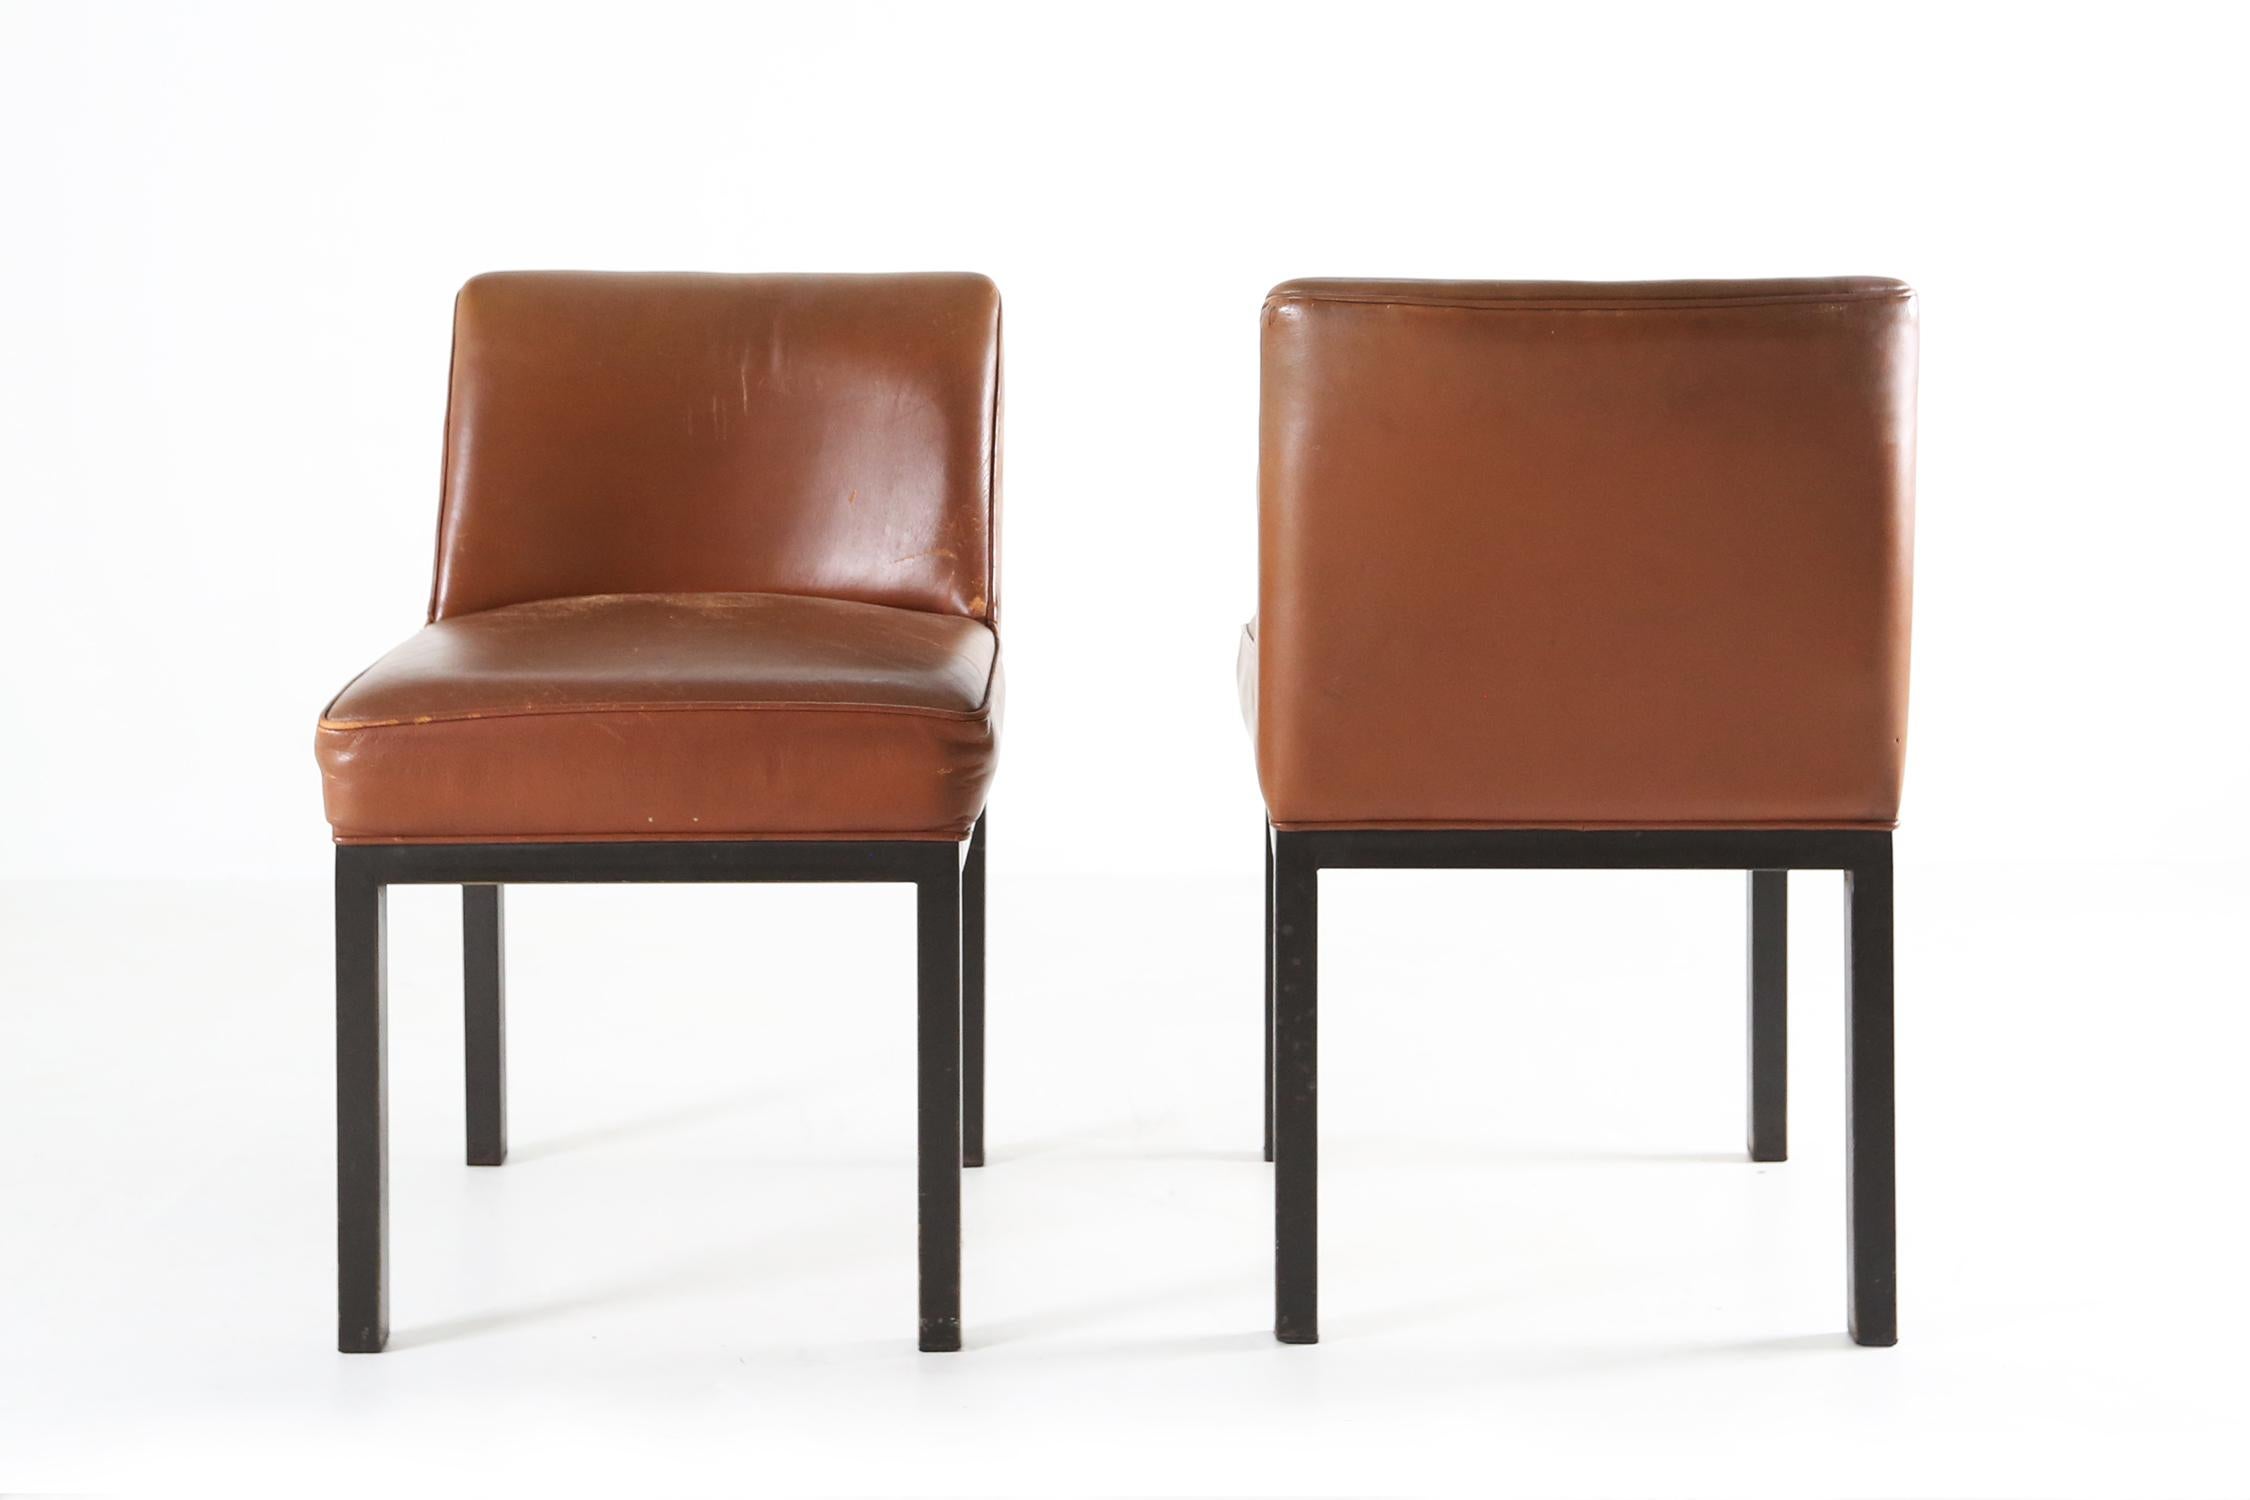 Two chairs by Belgian most important designer Jules Wabbes Ca. 1965.
These rare chairs have a black metal base and a brown leather seat.
Made by Jules Wabbes his own company Le Mobilier Universel.